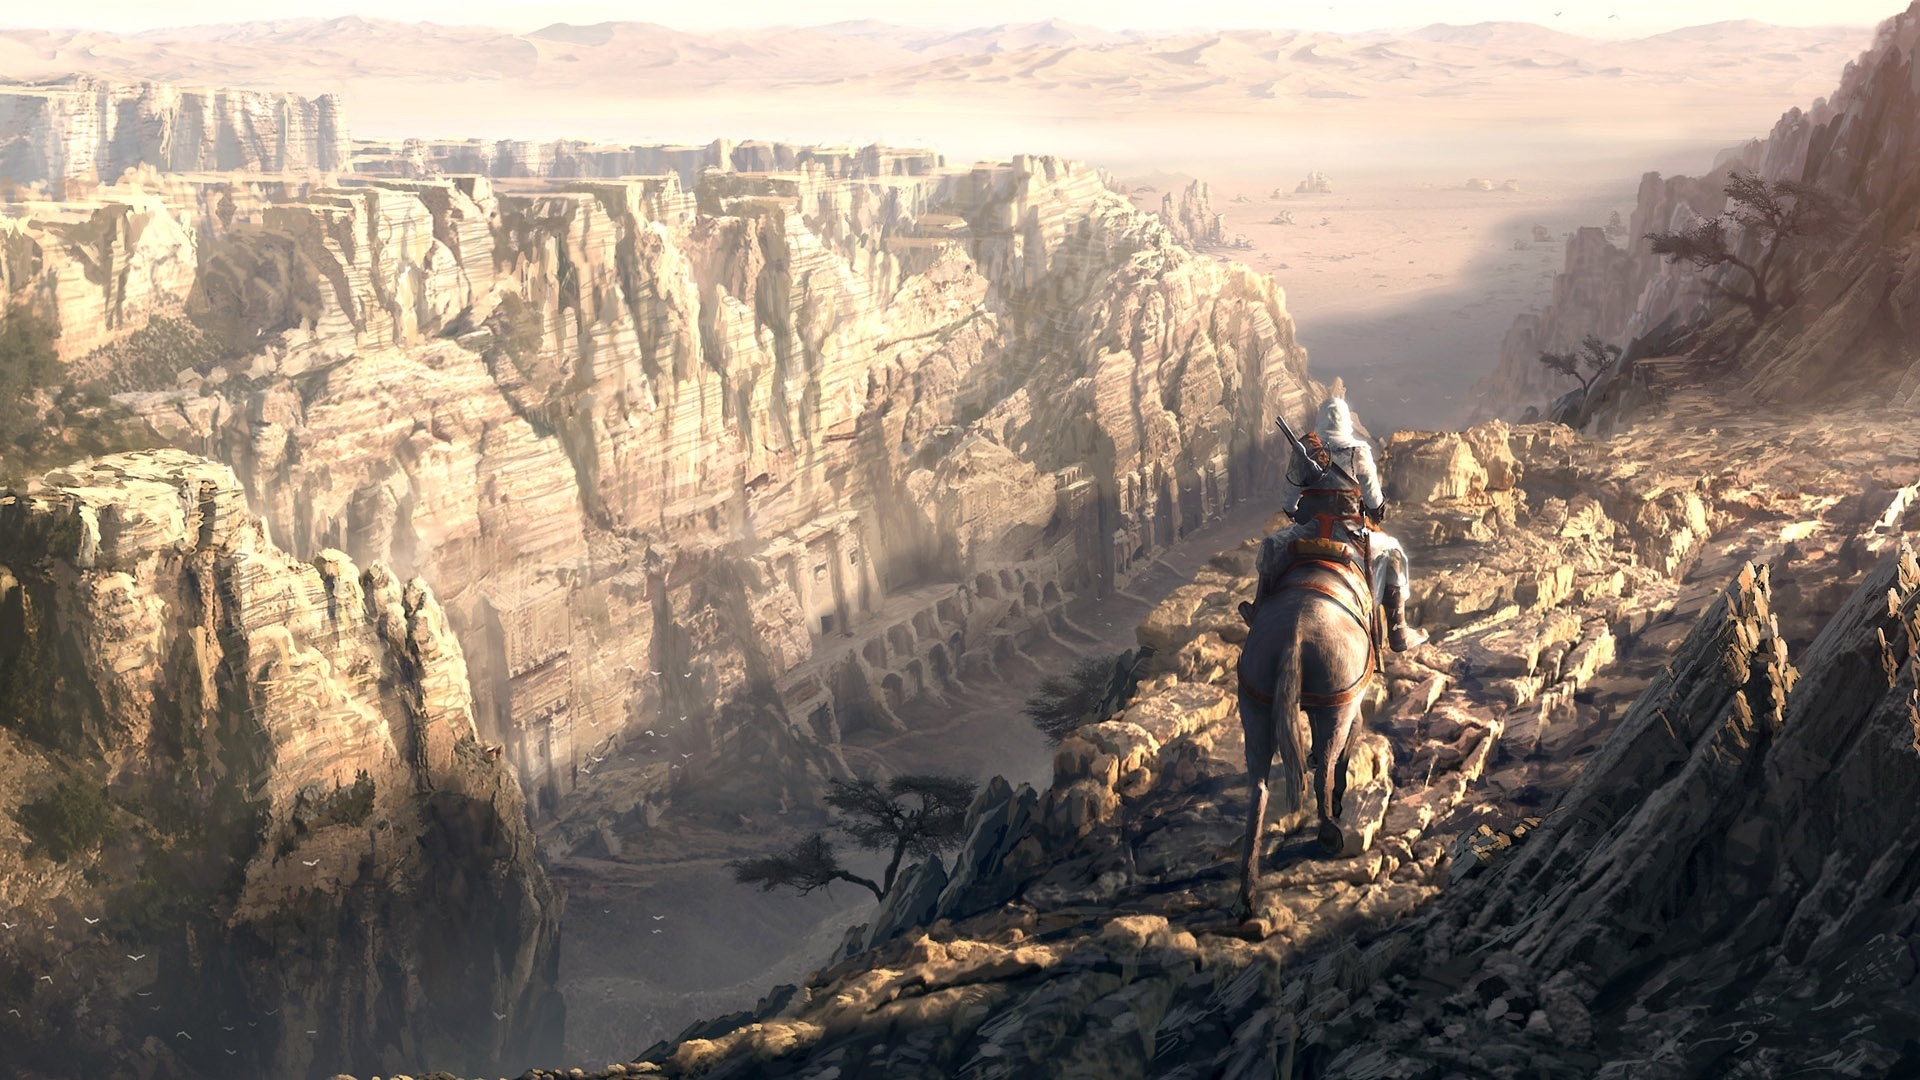 Wallpaper. Fantasy. photo. picture. mountains, cliff, lone warrior